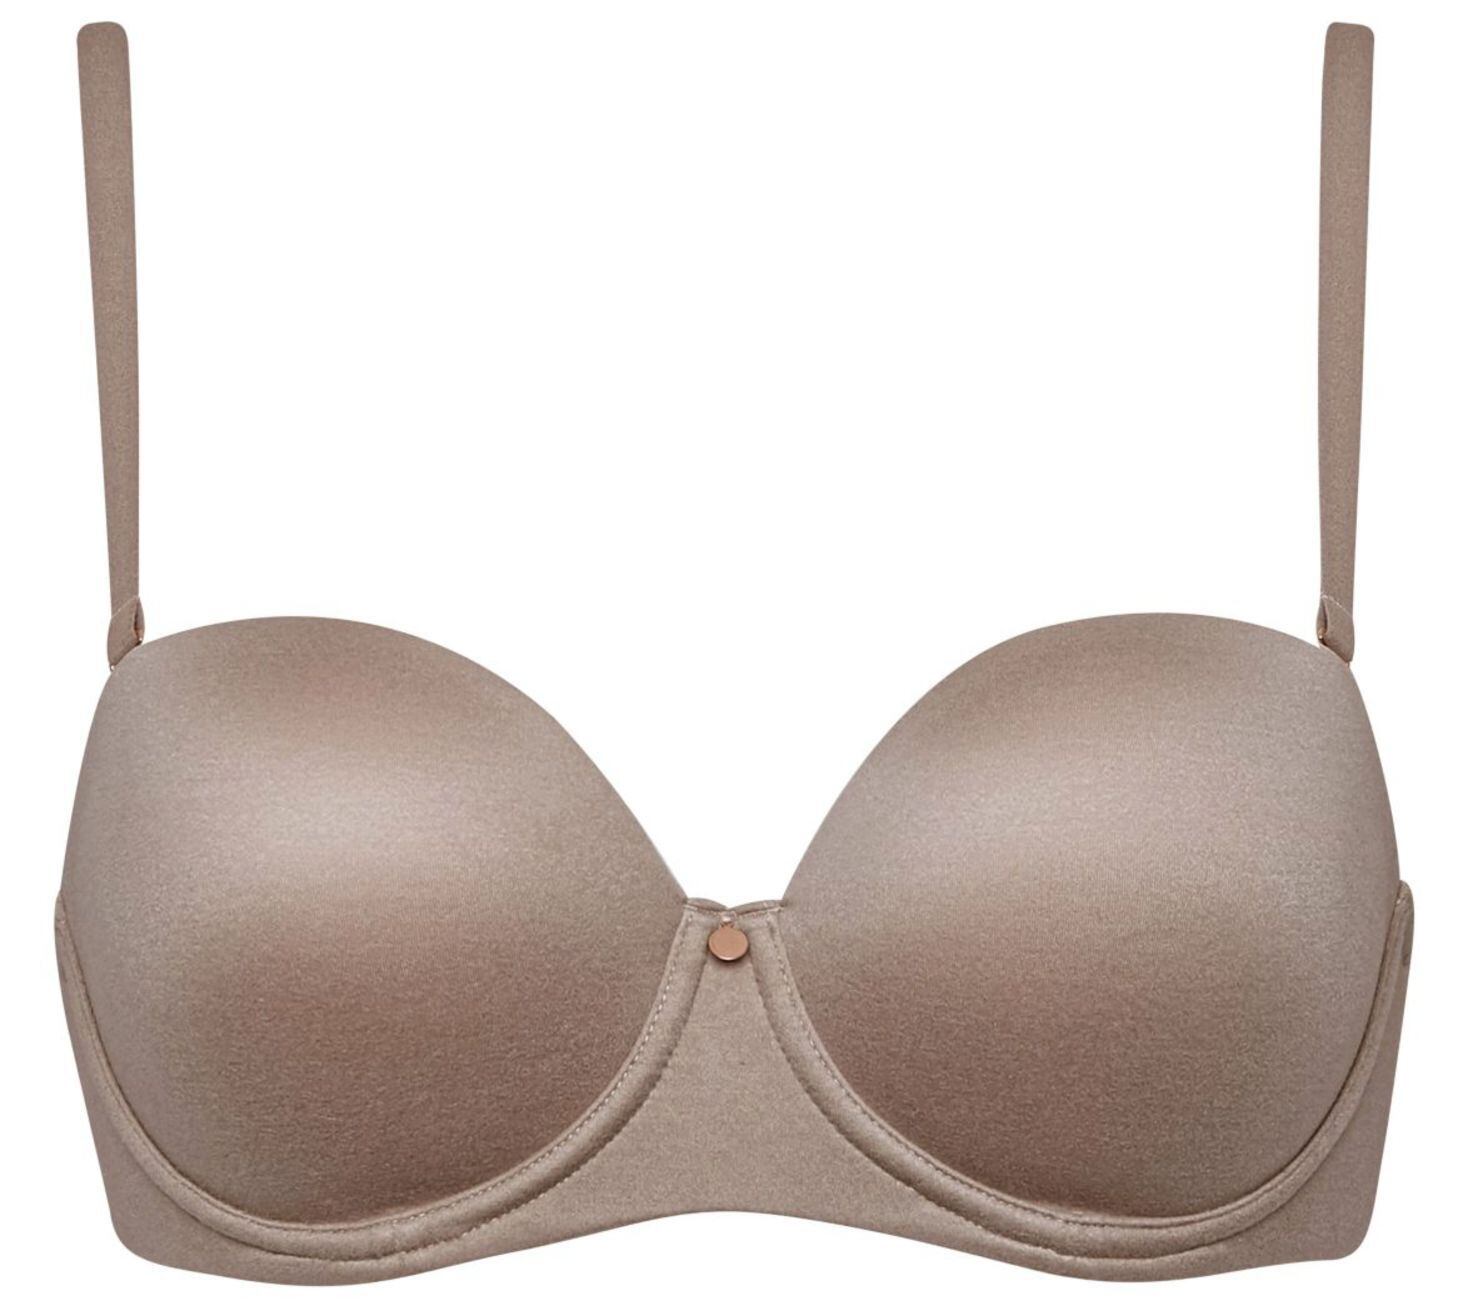 On trend: 5 ways to tell if your bra fits properly – The Irish News